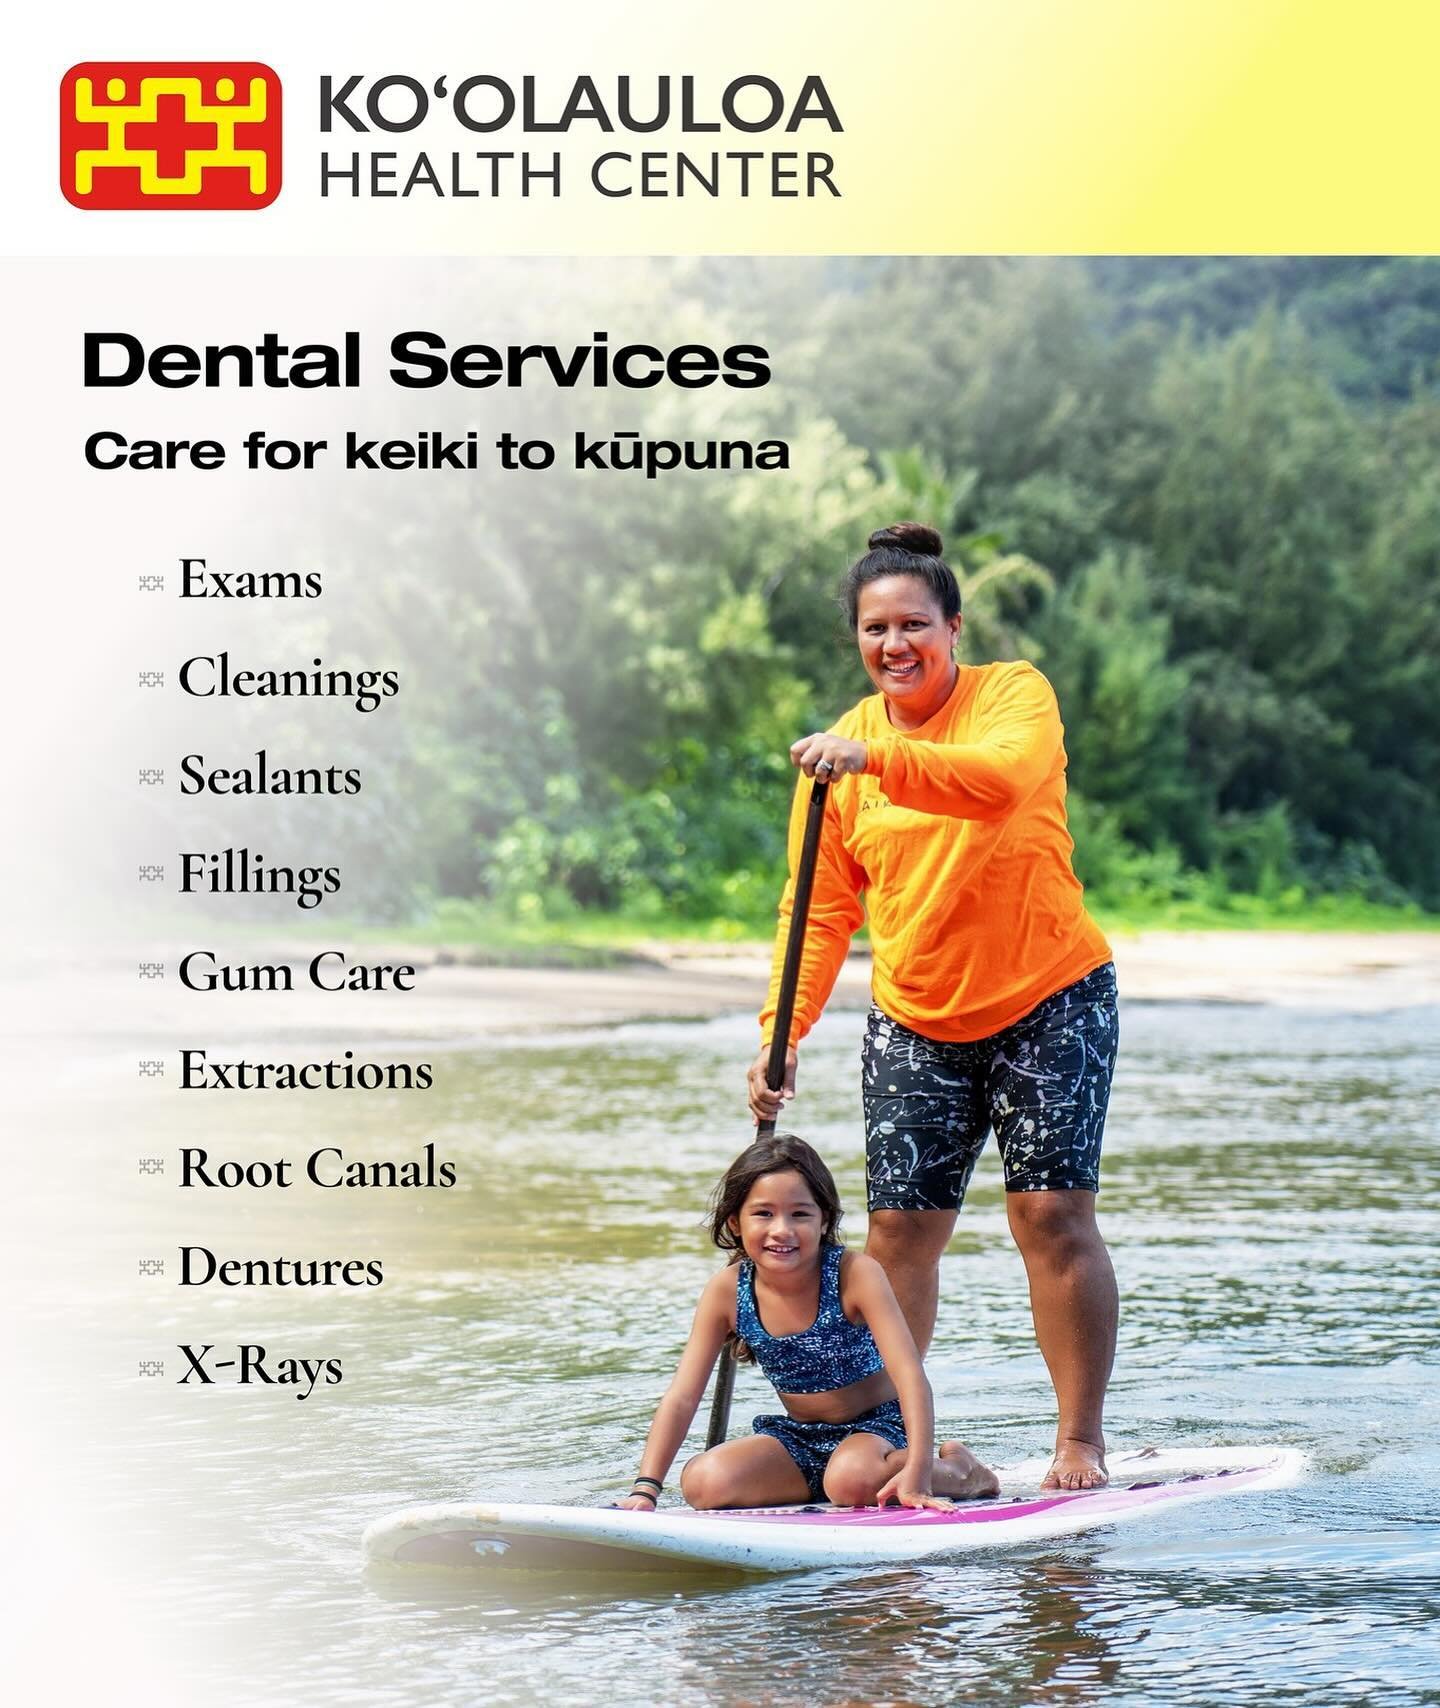 Aloha &lsquo;Ohana!

Ko&rsquo;olauloa Health Center&rsquo;s dental department offers dental services for keiki to kupuna. Our dental services include:

- Exams
- Cleanings
- Sealants
- Fillings
- Gum Care
- Extractions
- Root Canals
- Dentures
- X-Ra